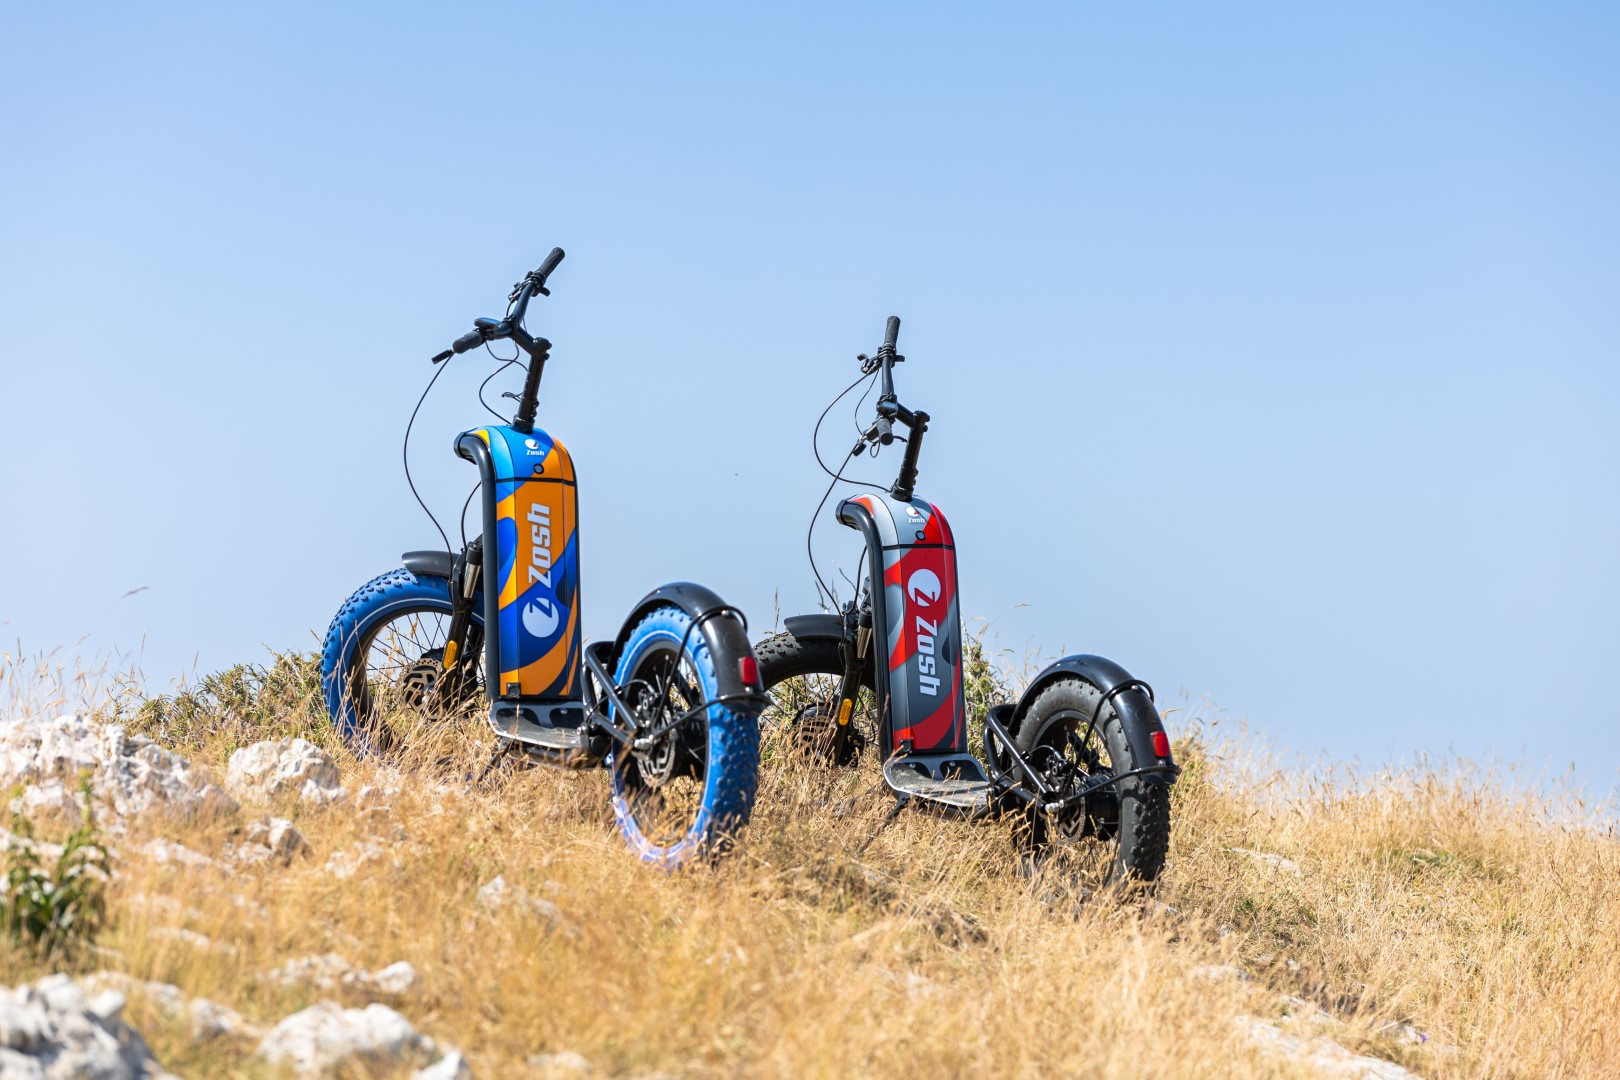 Zosh, the all-terrain electric scooter for teens